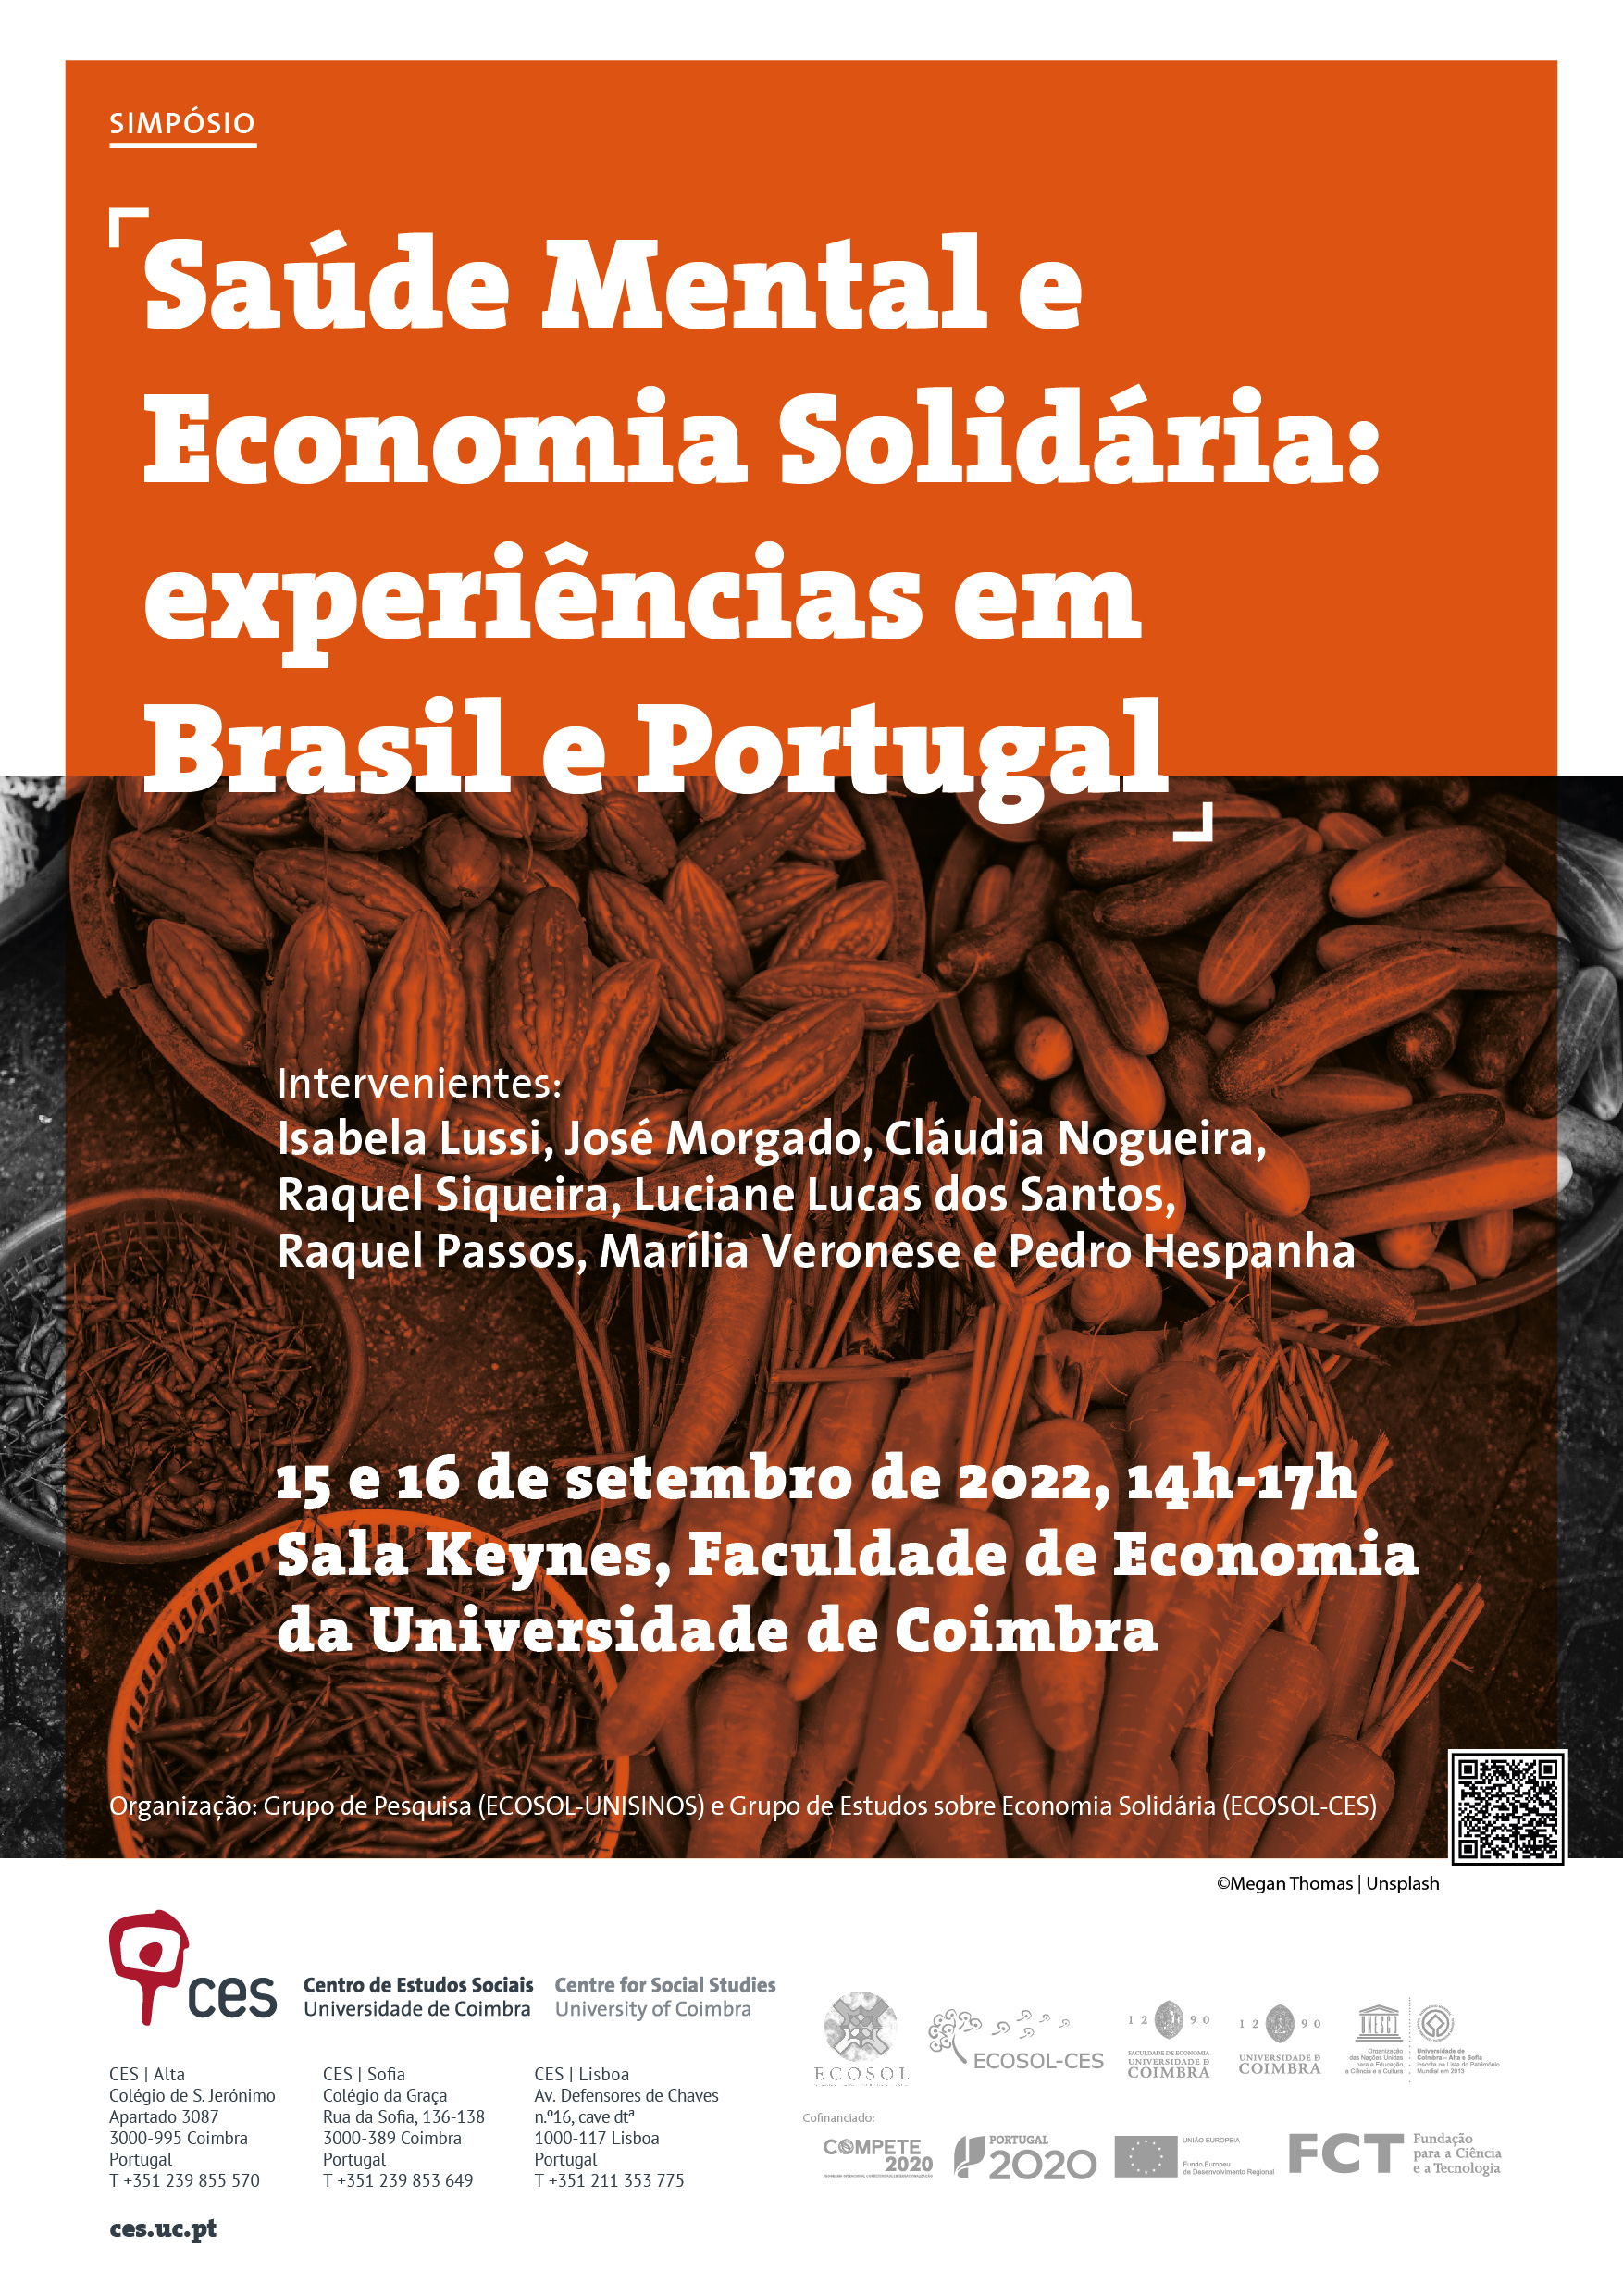 Mental health and solidarity economy: experiences in Brazil and Portugal<span id="edit_38969"><script>$(function() { $('#edit_38969').load( "/myces/user/editobj.php?tipo=evento&id=38969" ); });</script></span>